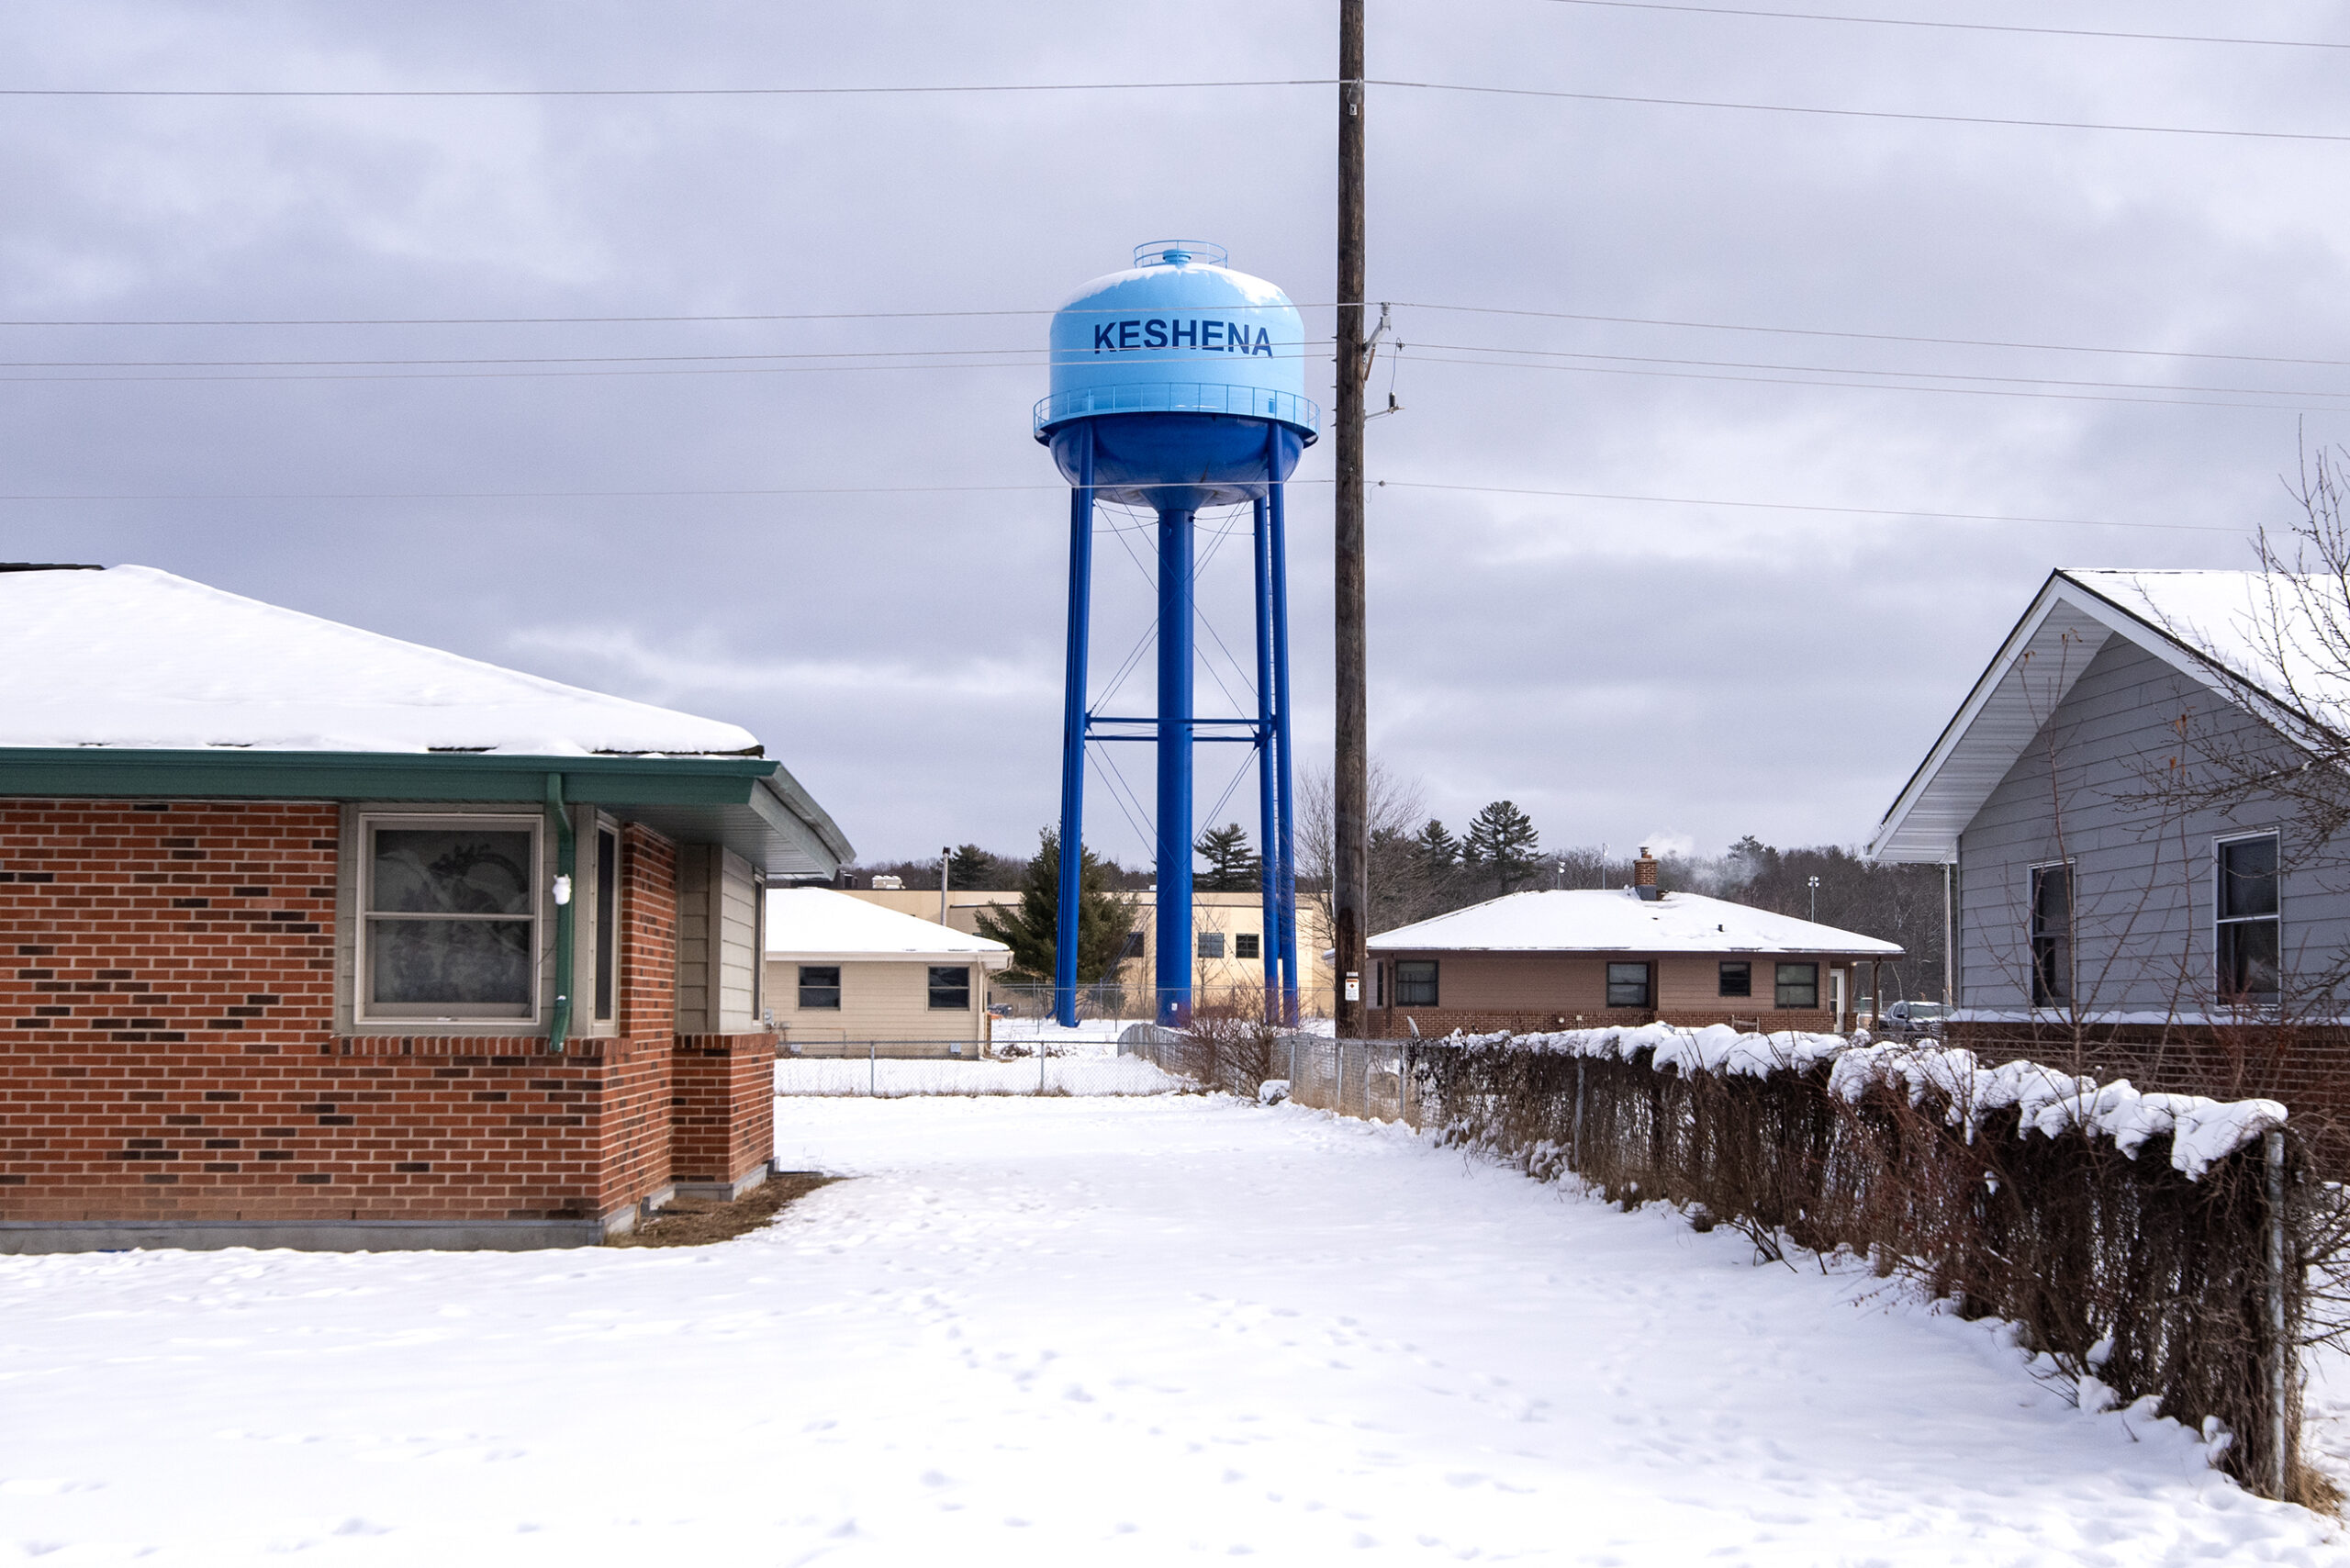 A blue water tower with 